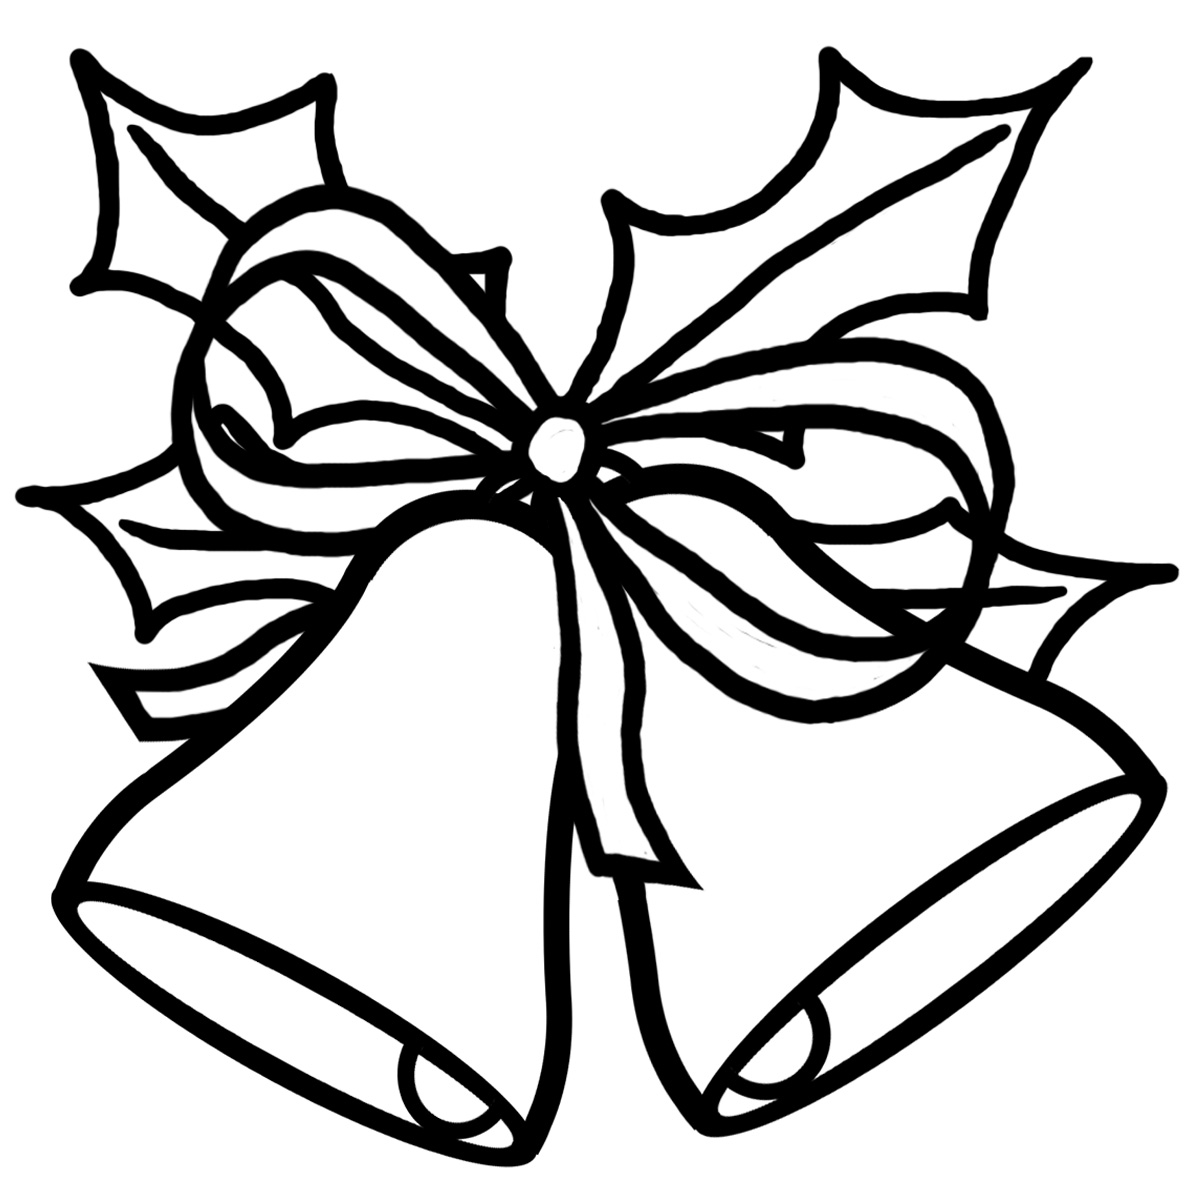 Happy Holidays Clip Art Black And White Hd Images 3 HD Wallpapers 